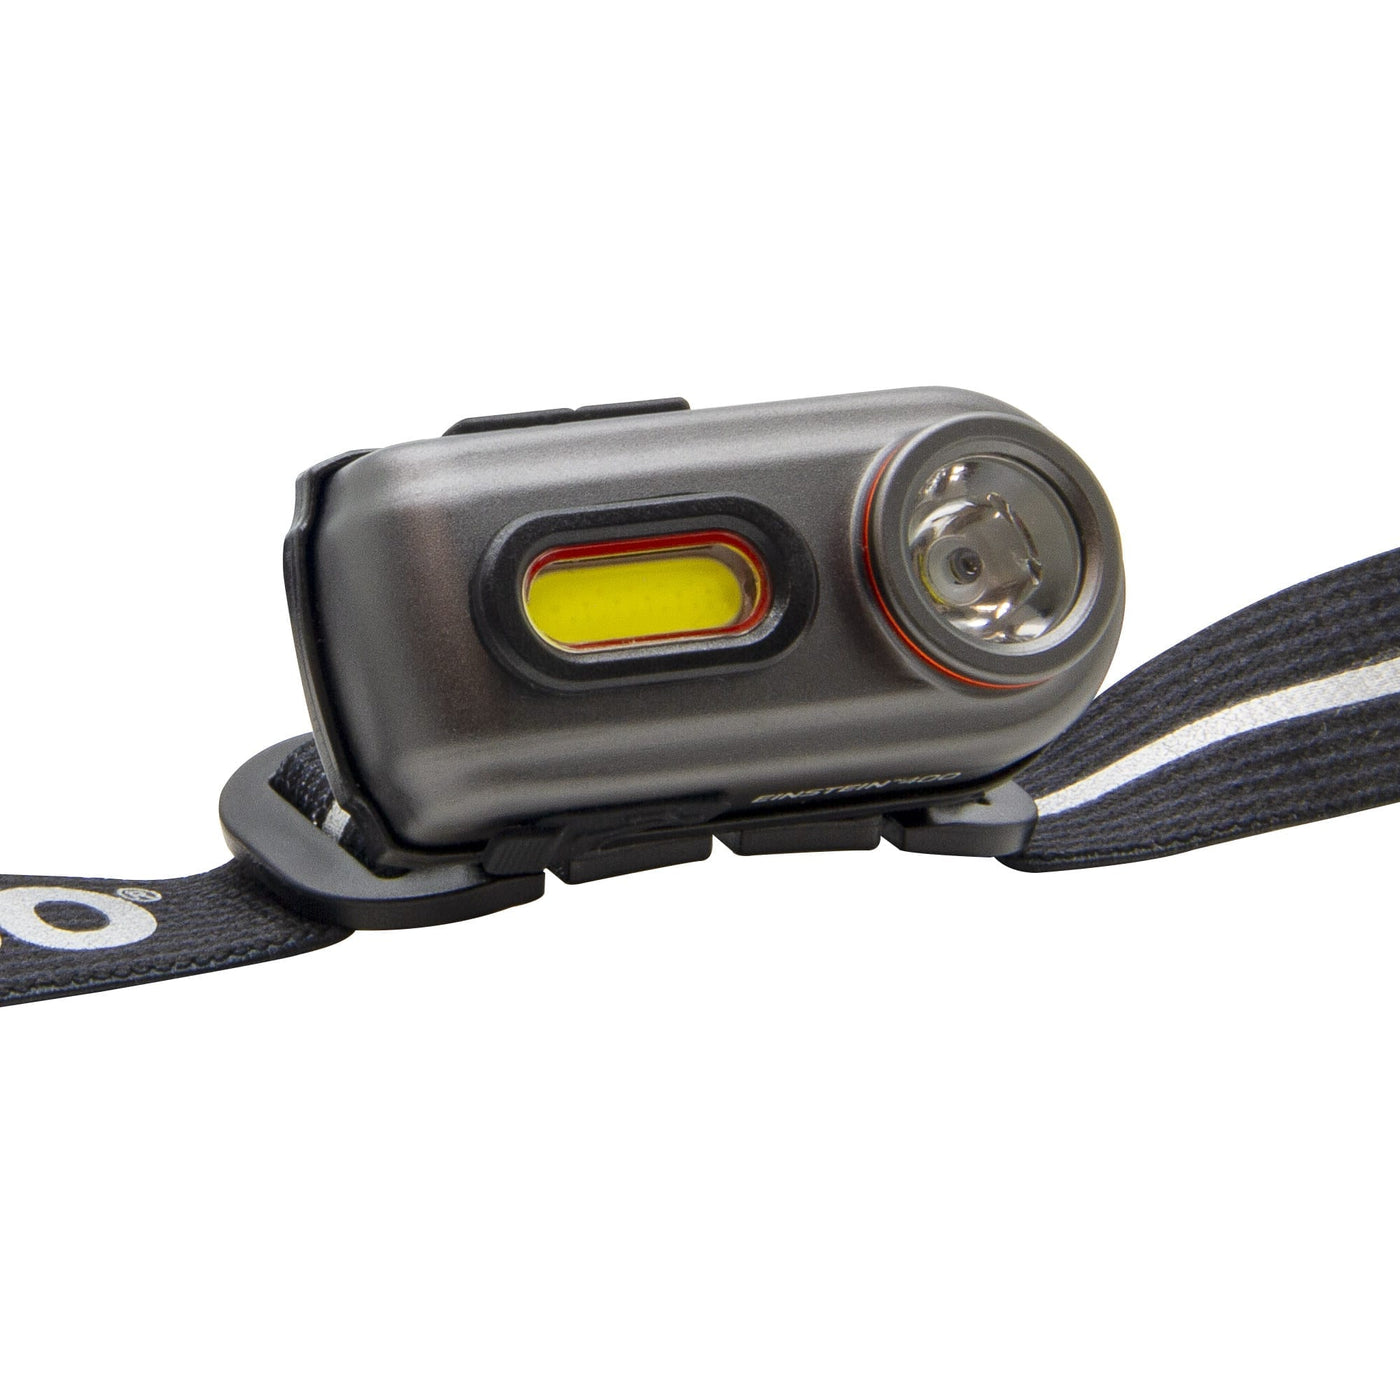 At Nebo Tools, we continually innovate so that we can offer the highest quality LED lighting products at the best price. The Einstein™ 400 RC Headlamp by NEBO is a low-profile, compact 400 lumen rechargeable headlamp with 5 light modes. Featuring a wide beam COB LED and a focused spotlight beam, the Einstein will have you covered whatever you're using it for. The included rechargeable battery allows for up to 8 hours of operation in between charges.